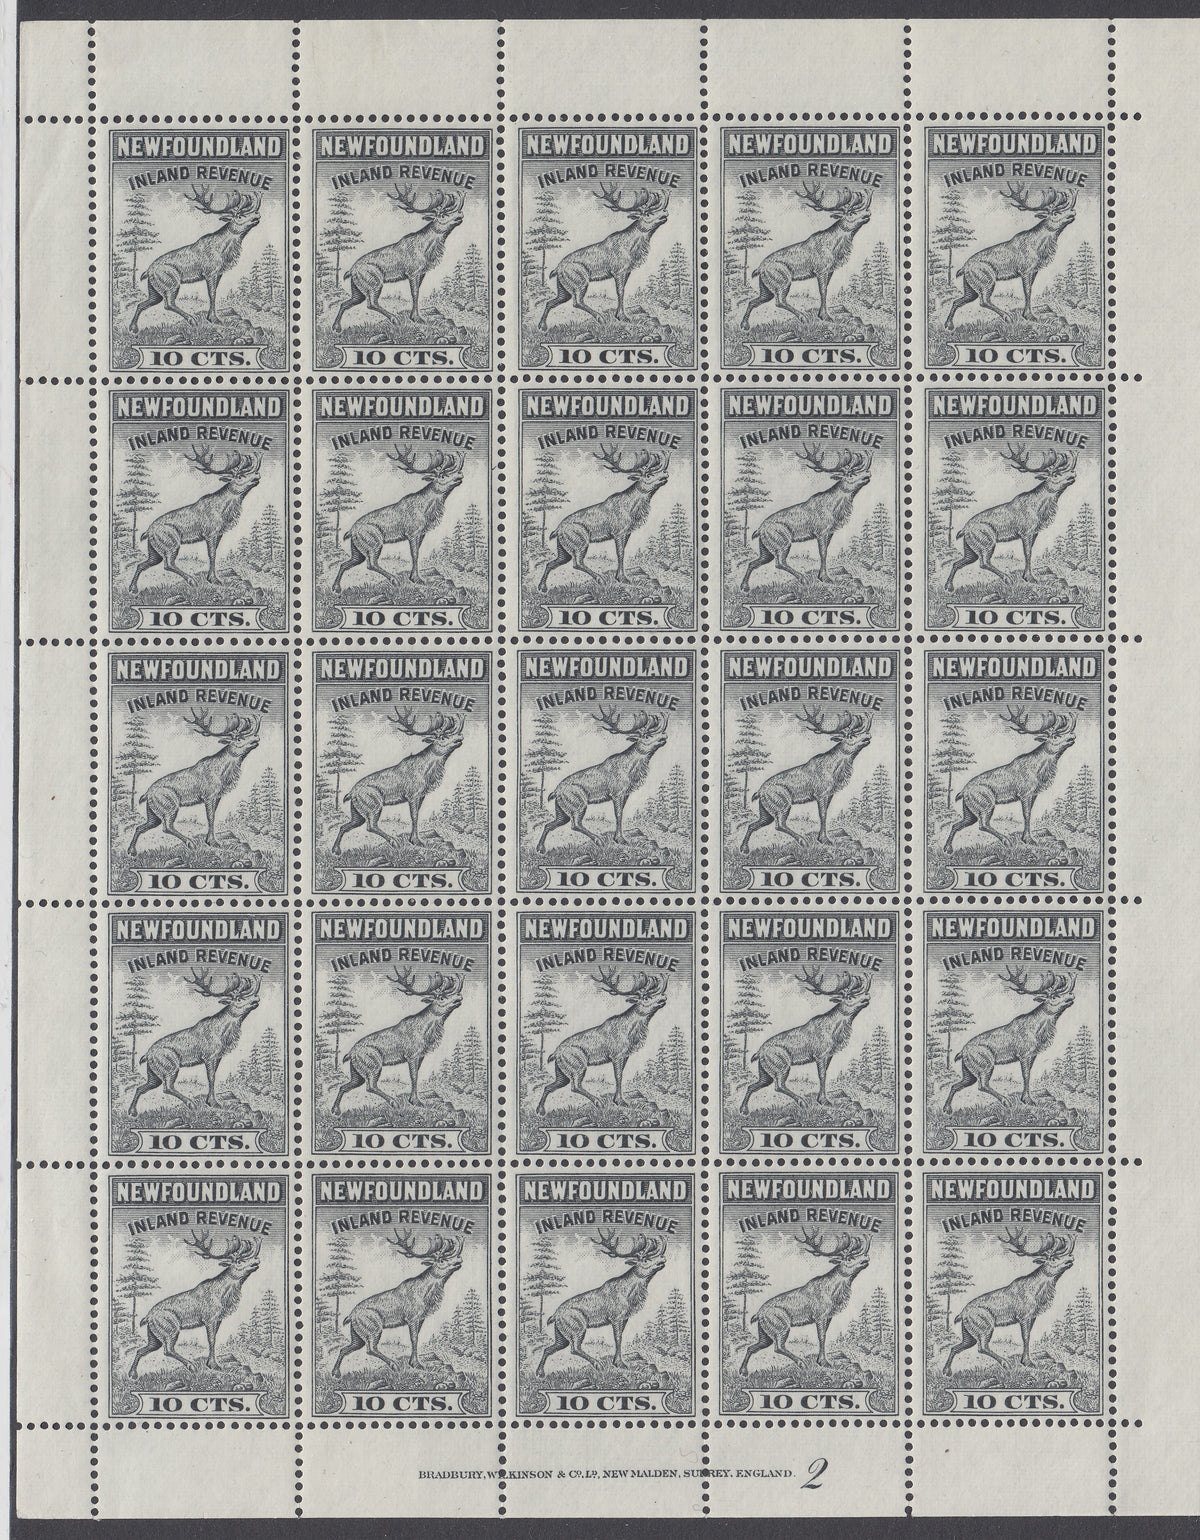 0047NF2105 - NFR47 - Mint Complete Sheet